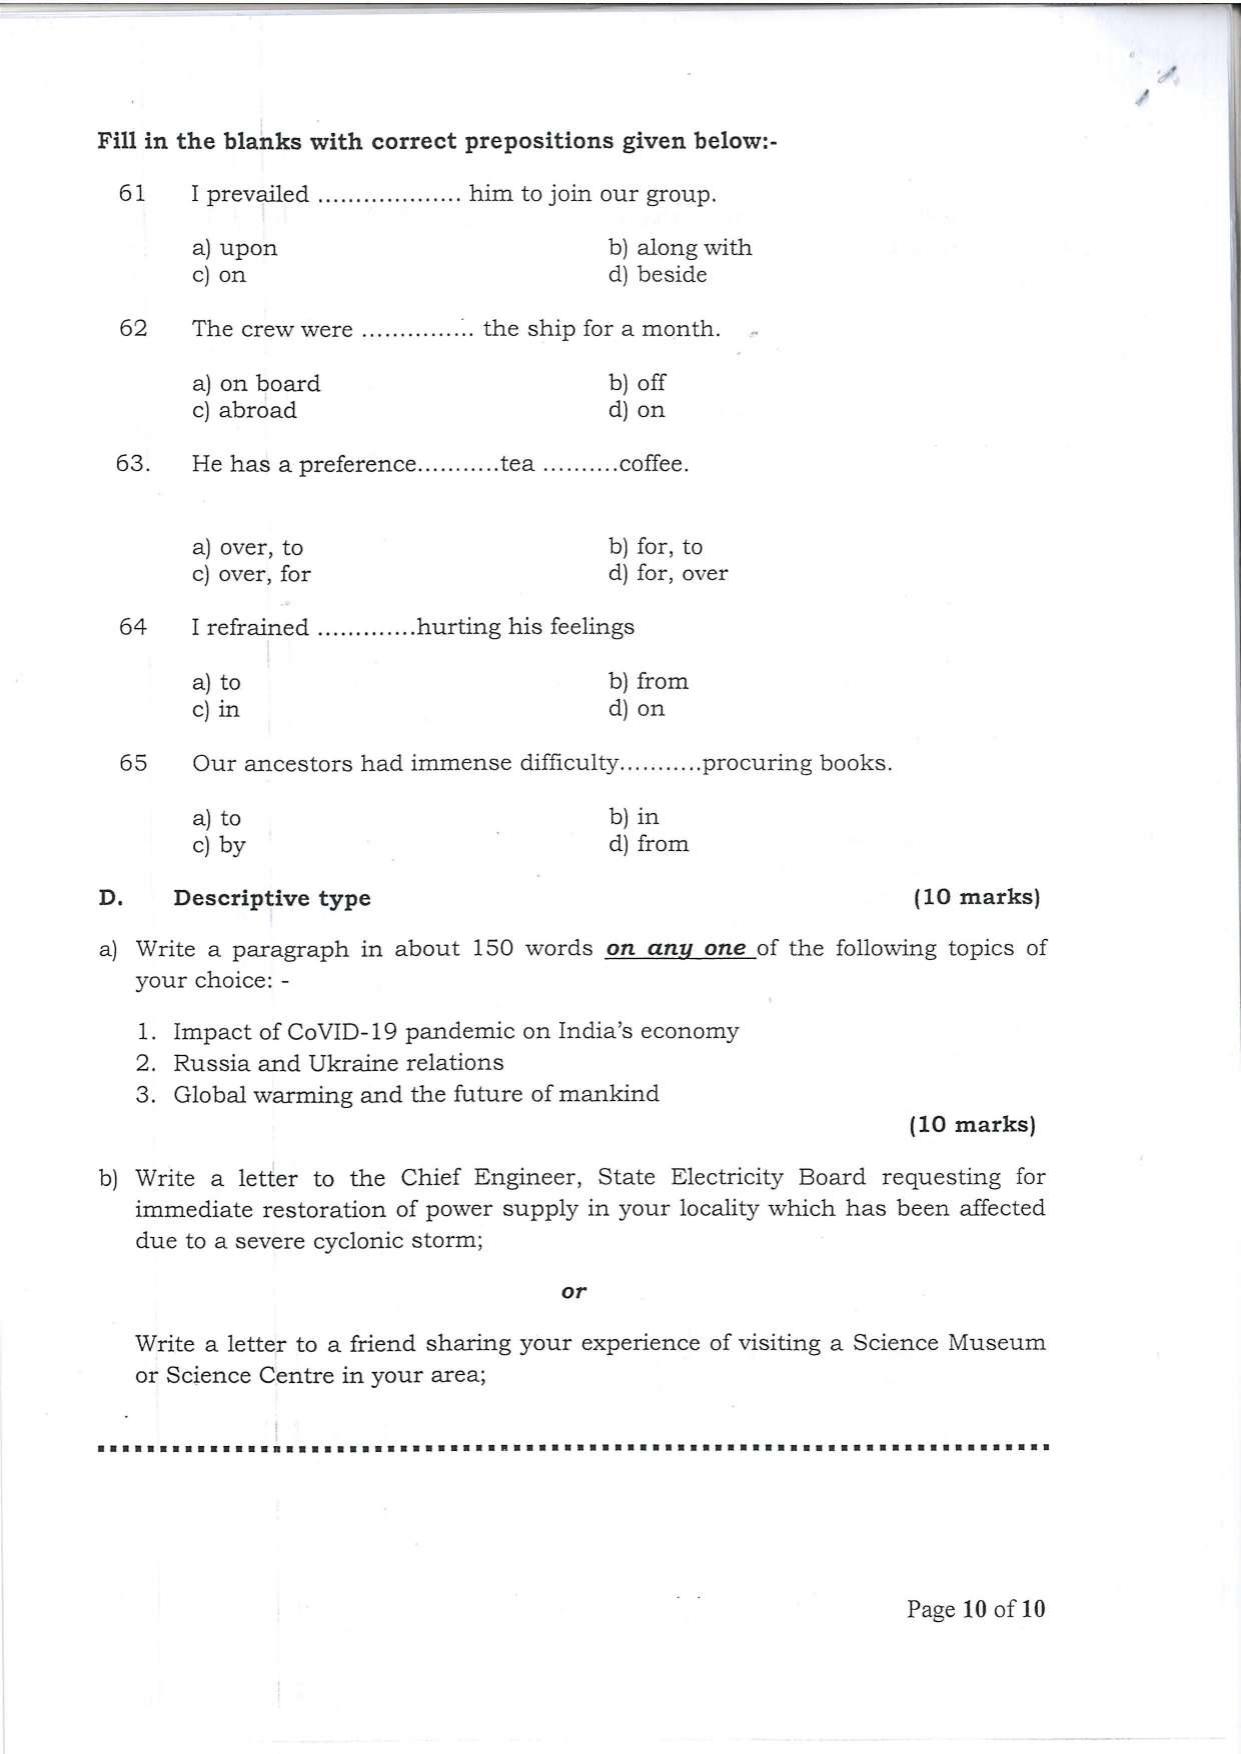 Question Paper of Office Assistant Grade III at BITM, Kolkata and NBSC, Siliguri (Advertisement No. 1/2022) - Page 10